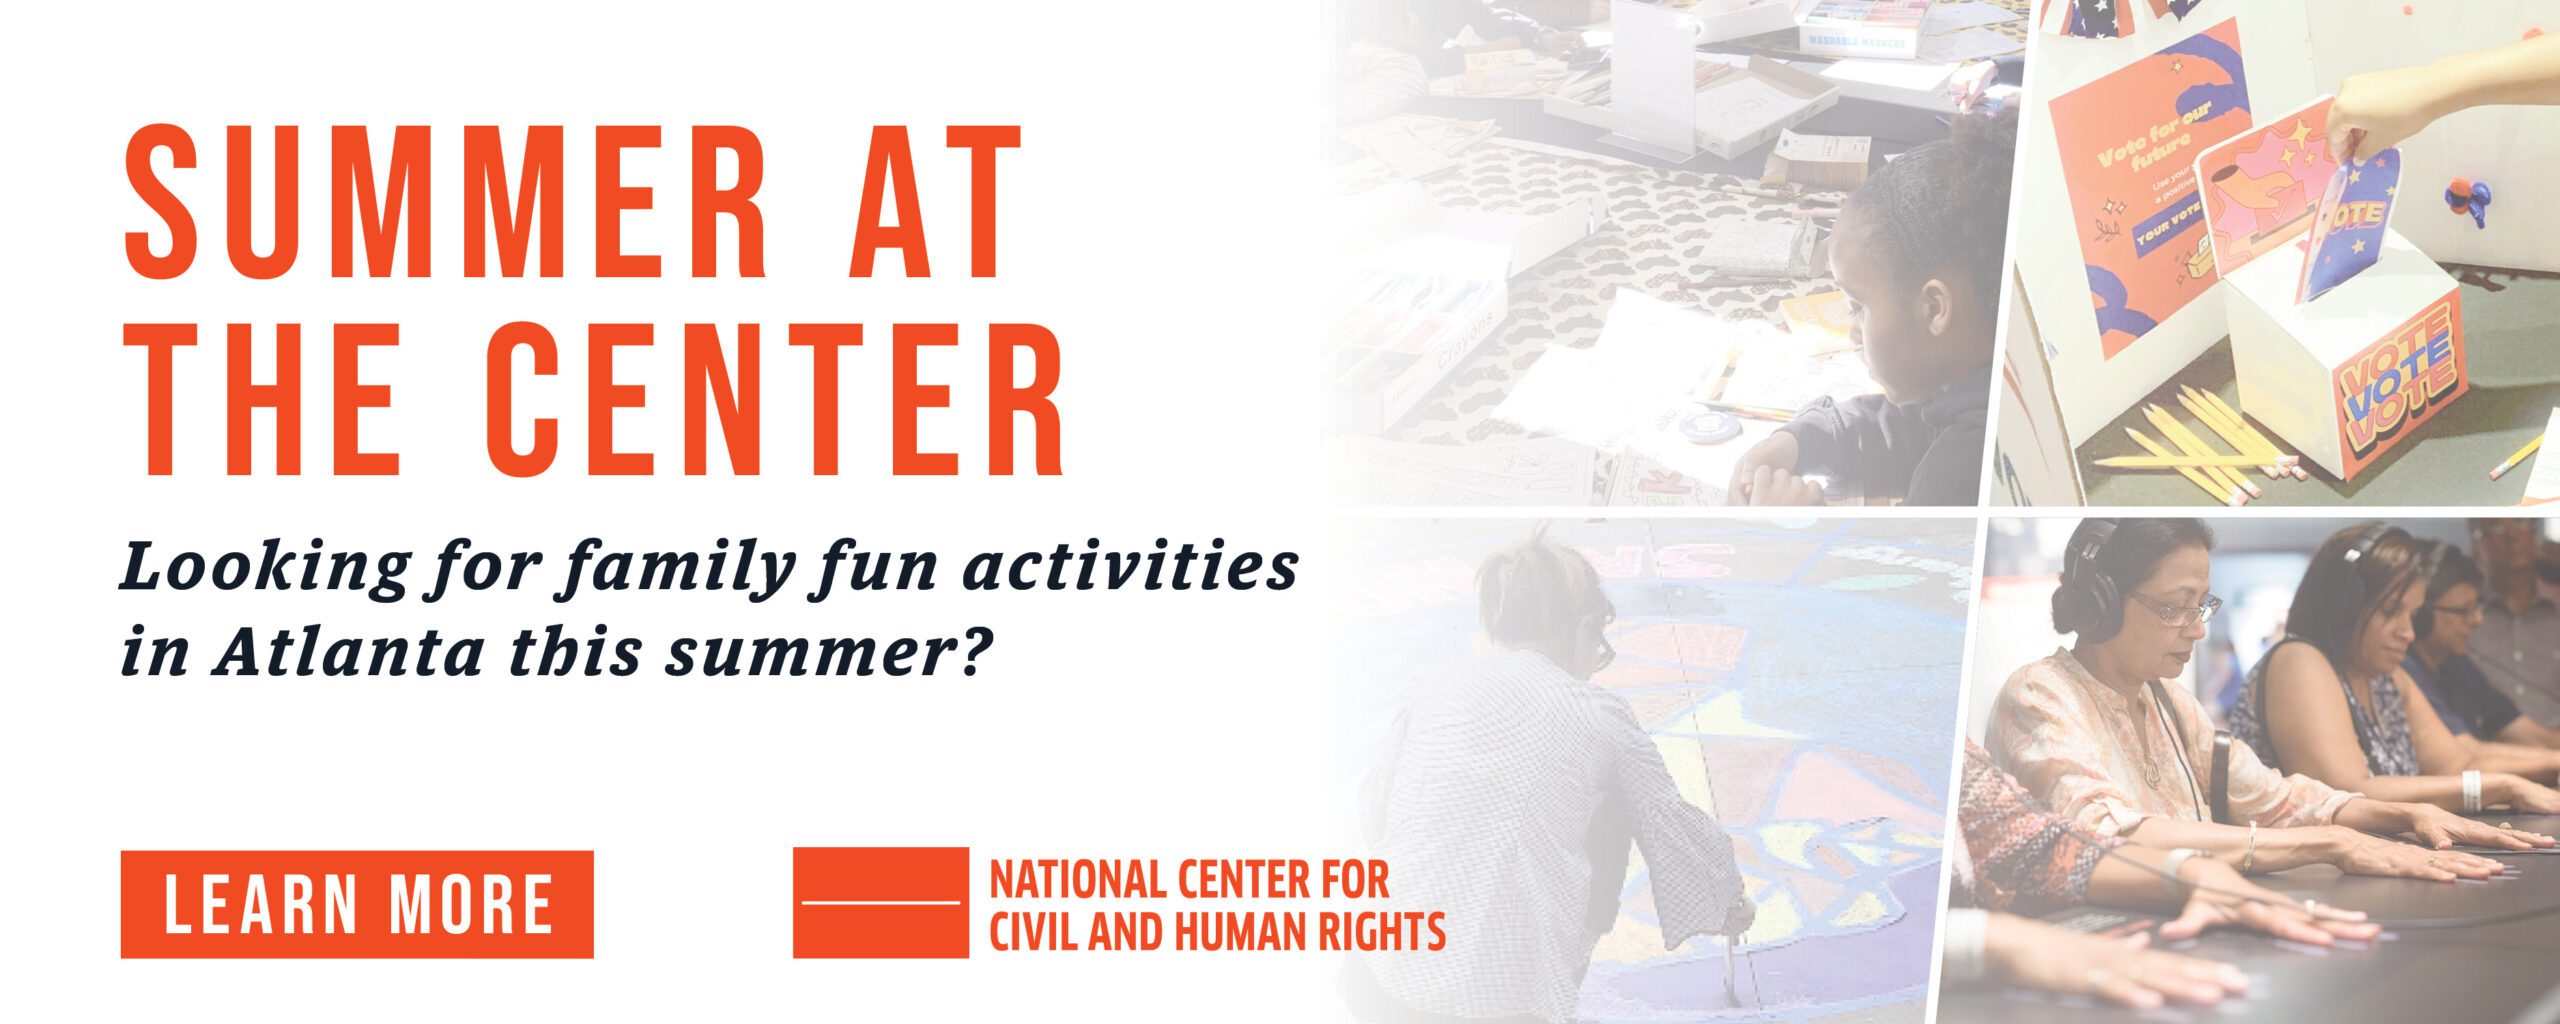 Summer at the center header graphic